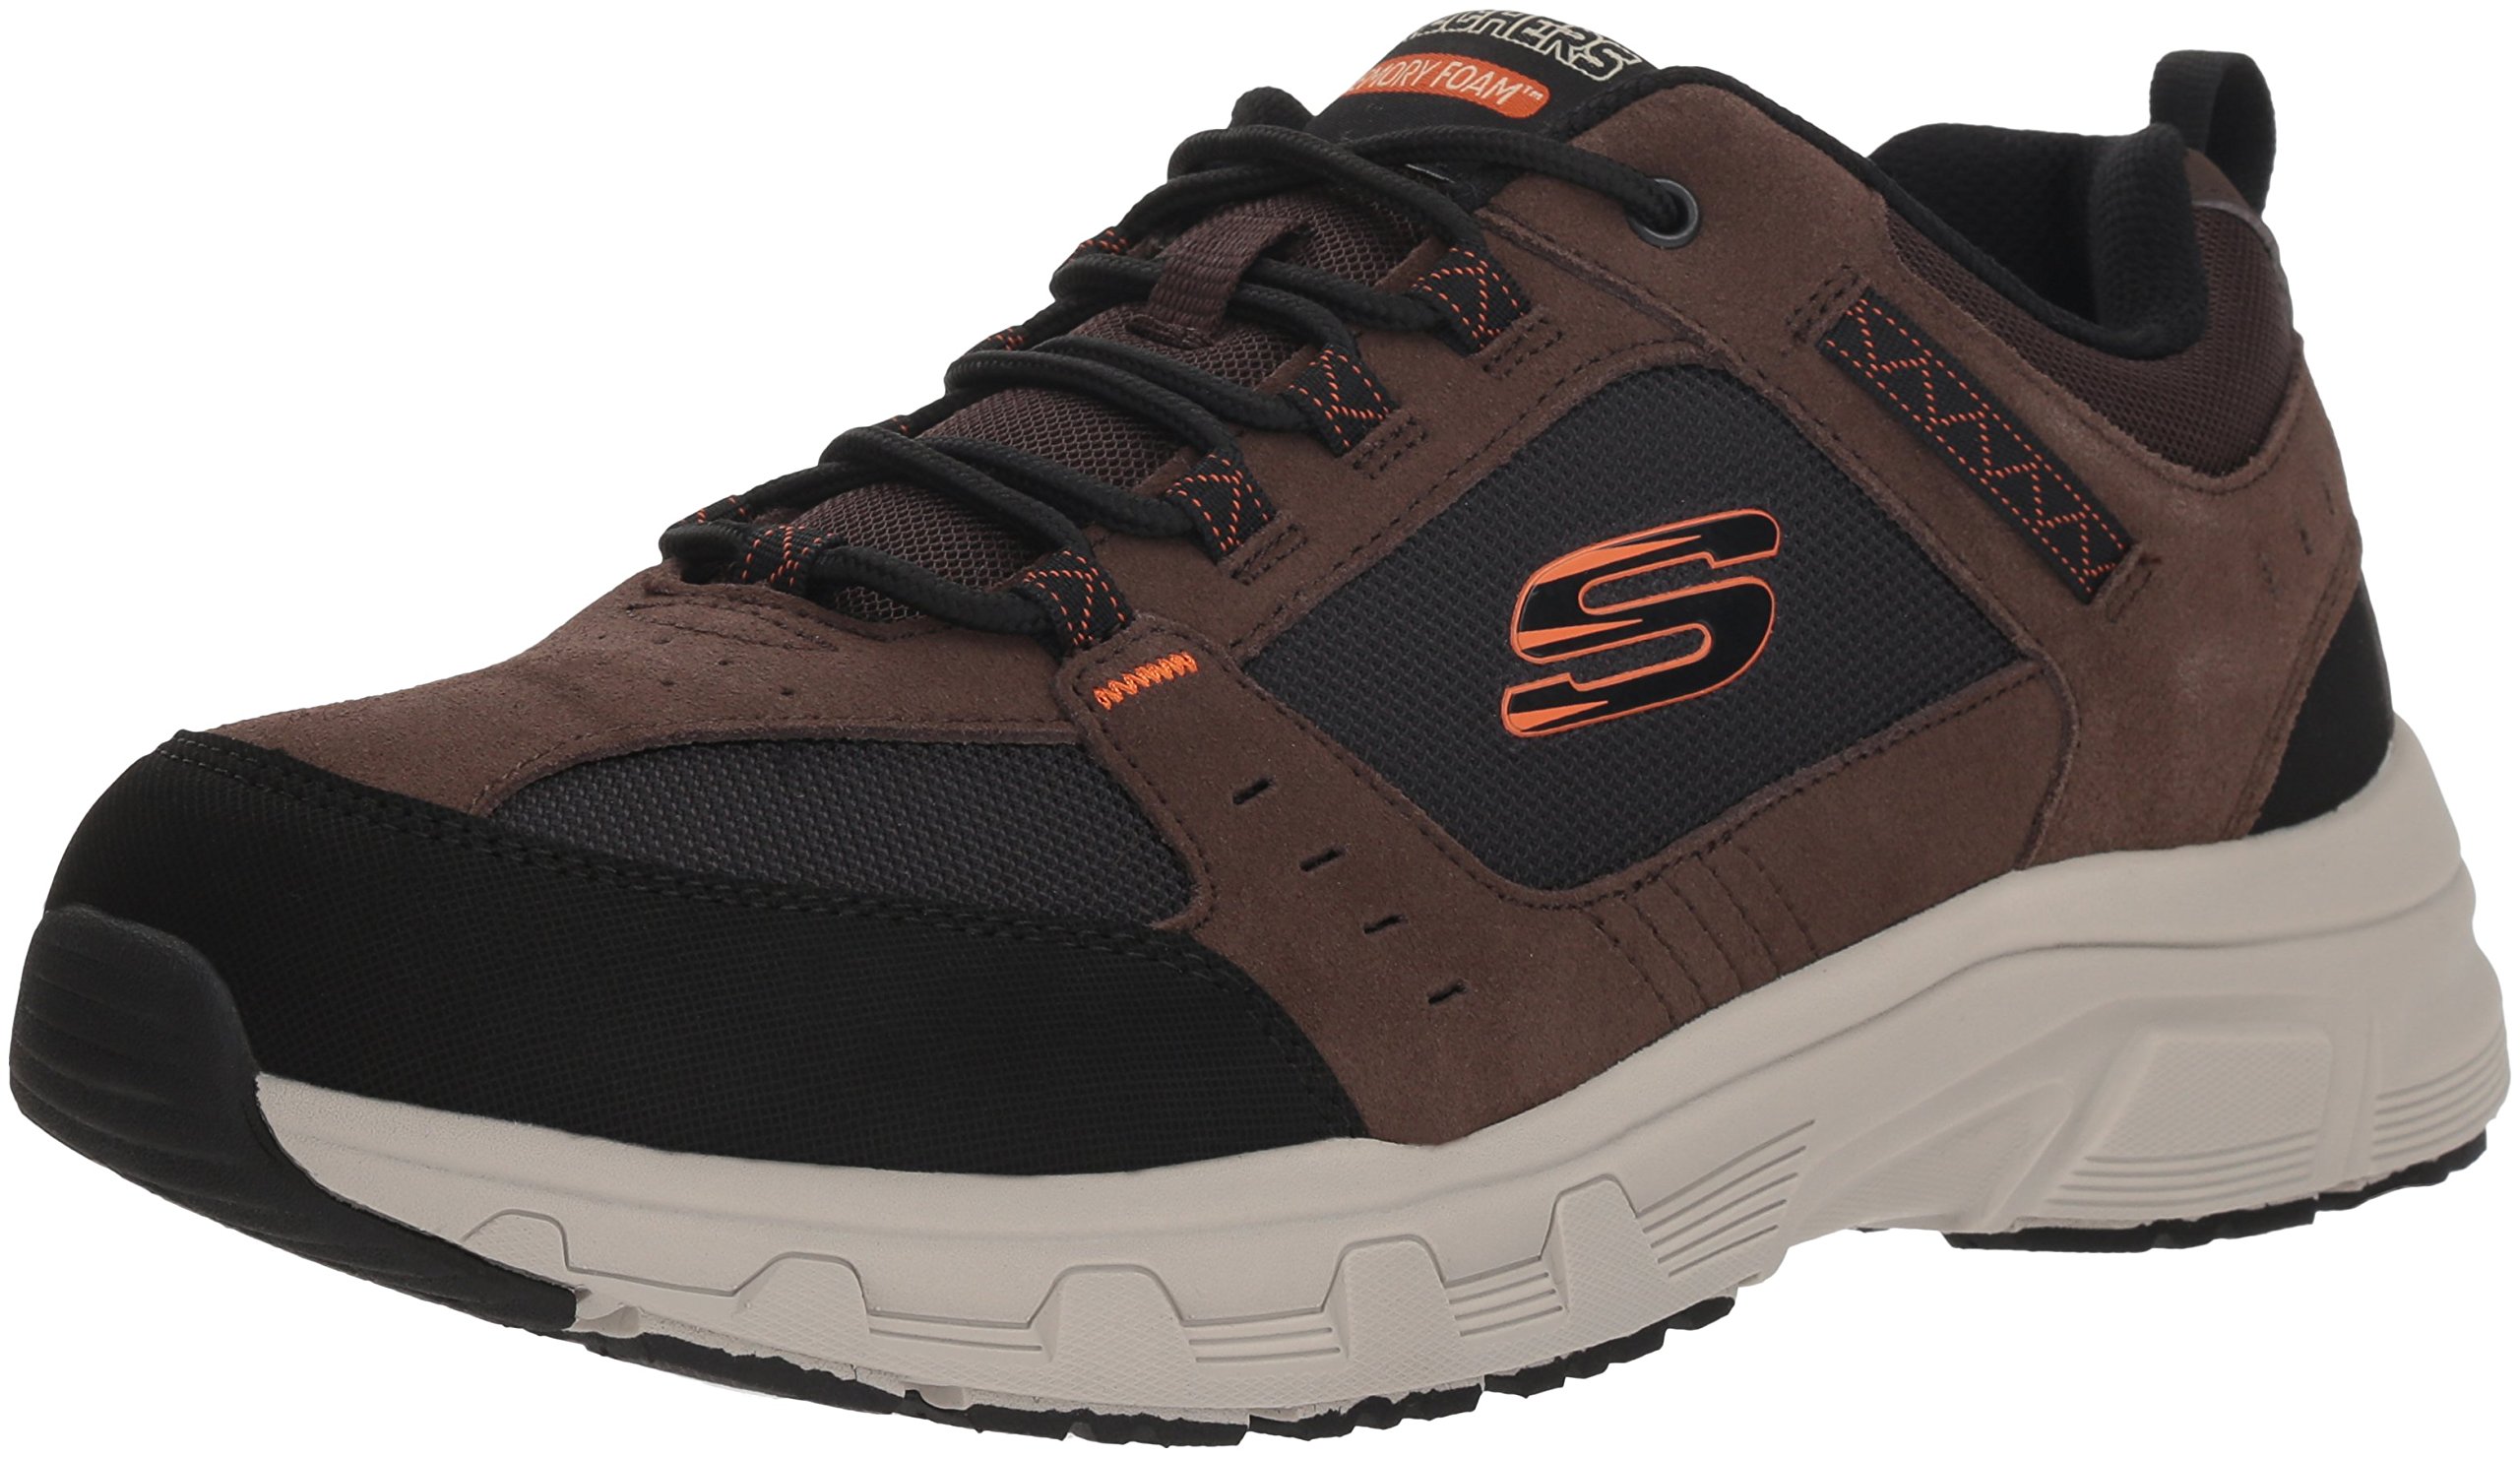 Skechers Men's Relaxed Fit Oak Canyon Sneaker (Wide Width Available) - image 5 of 7